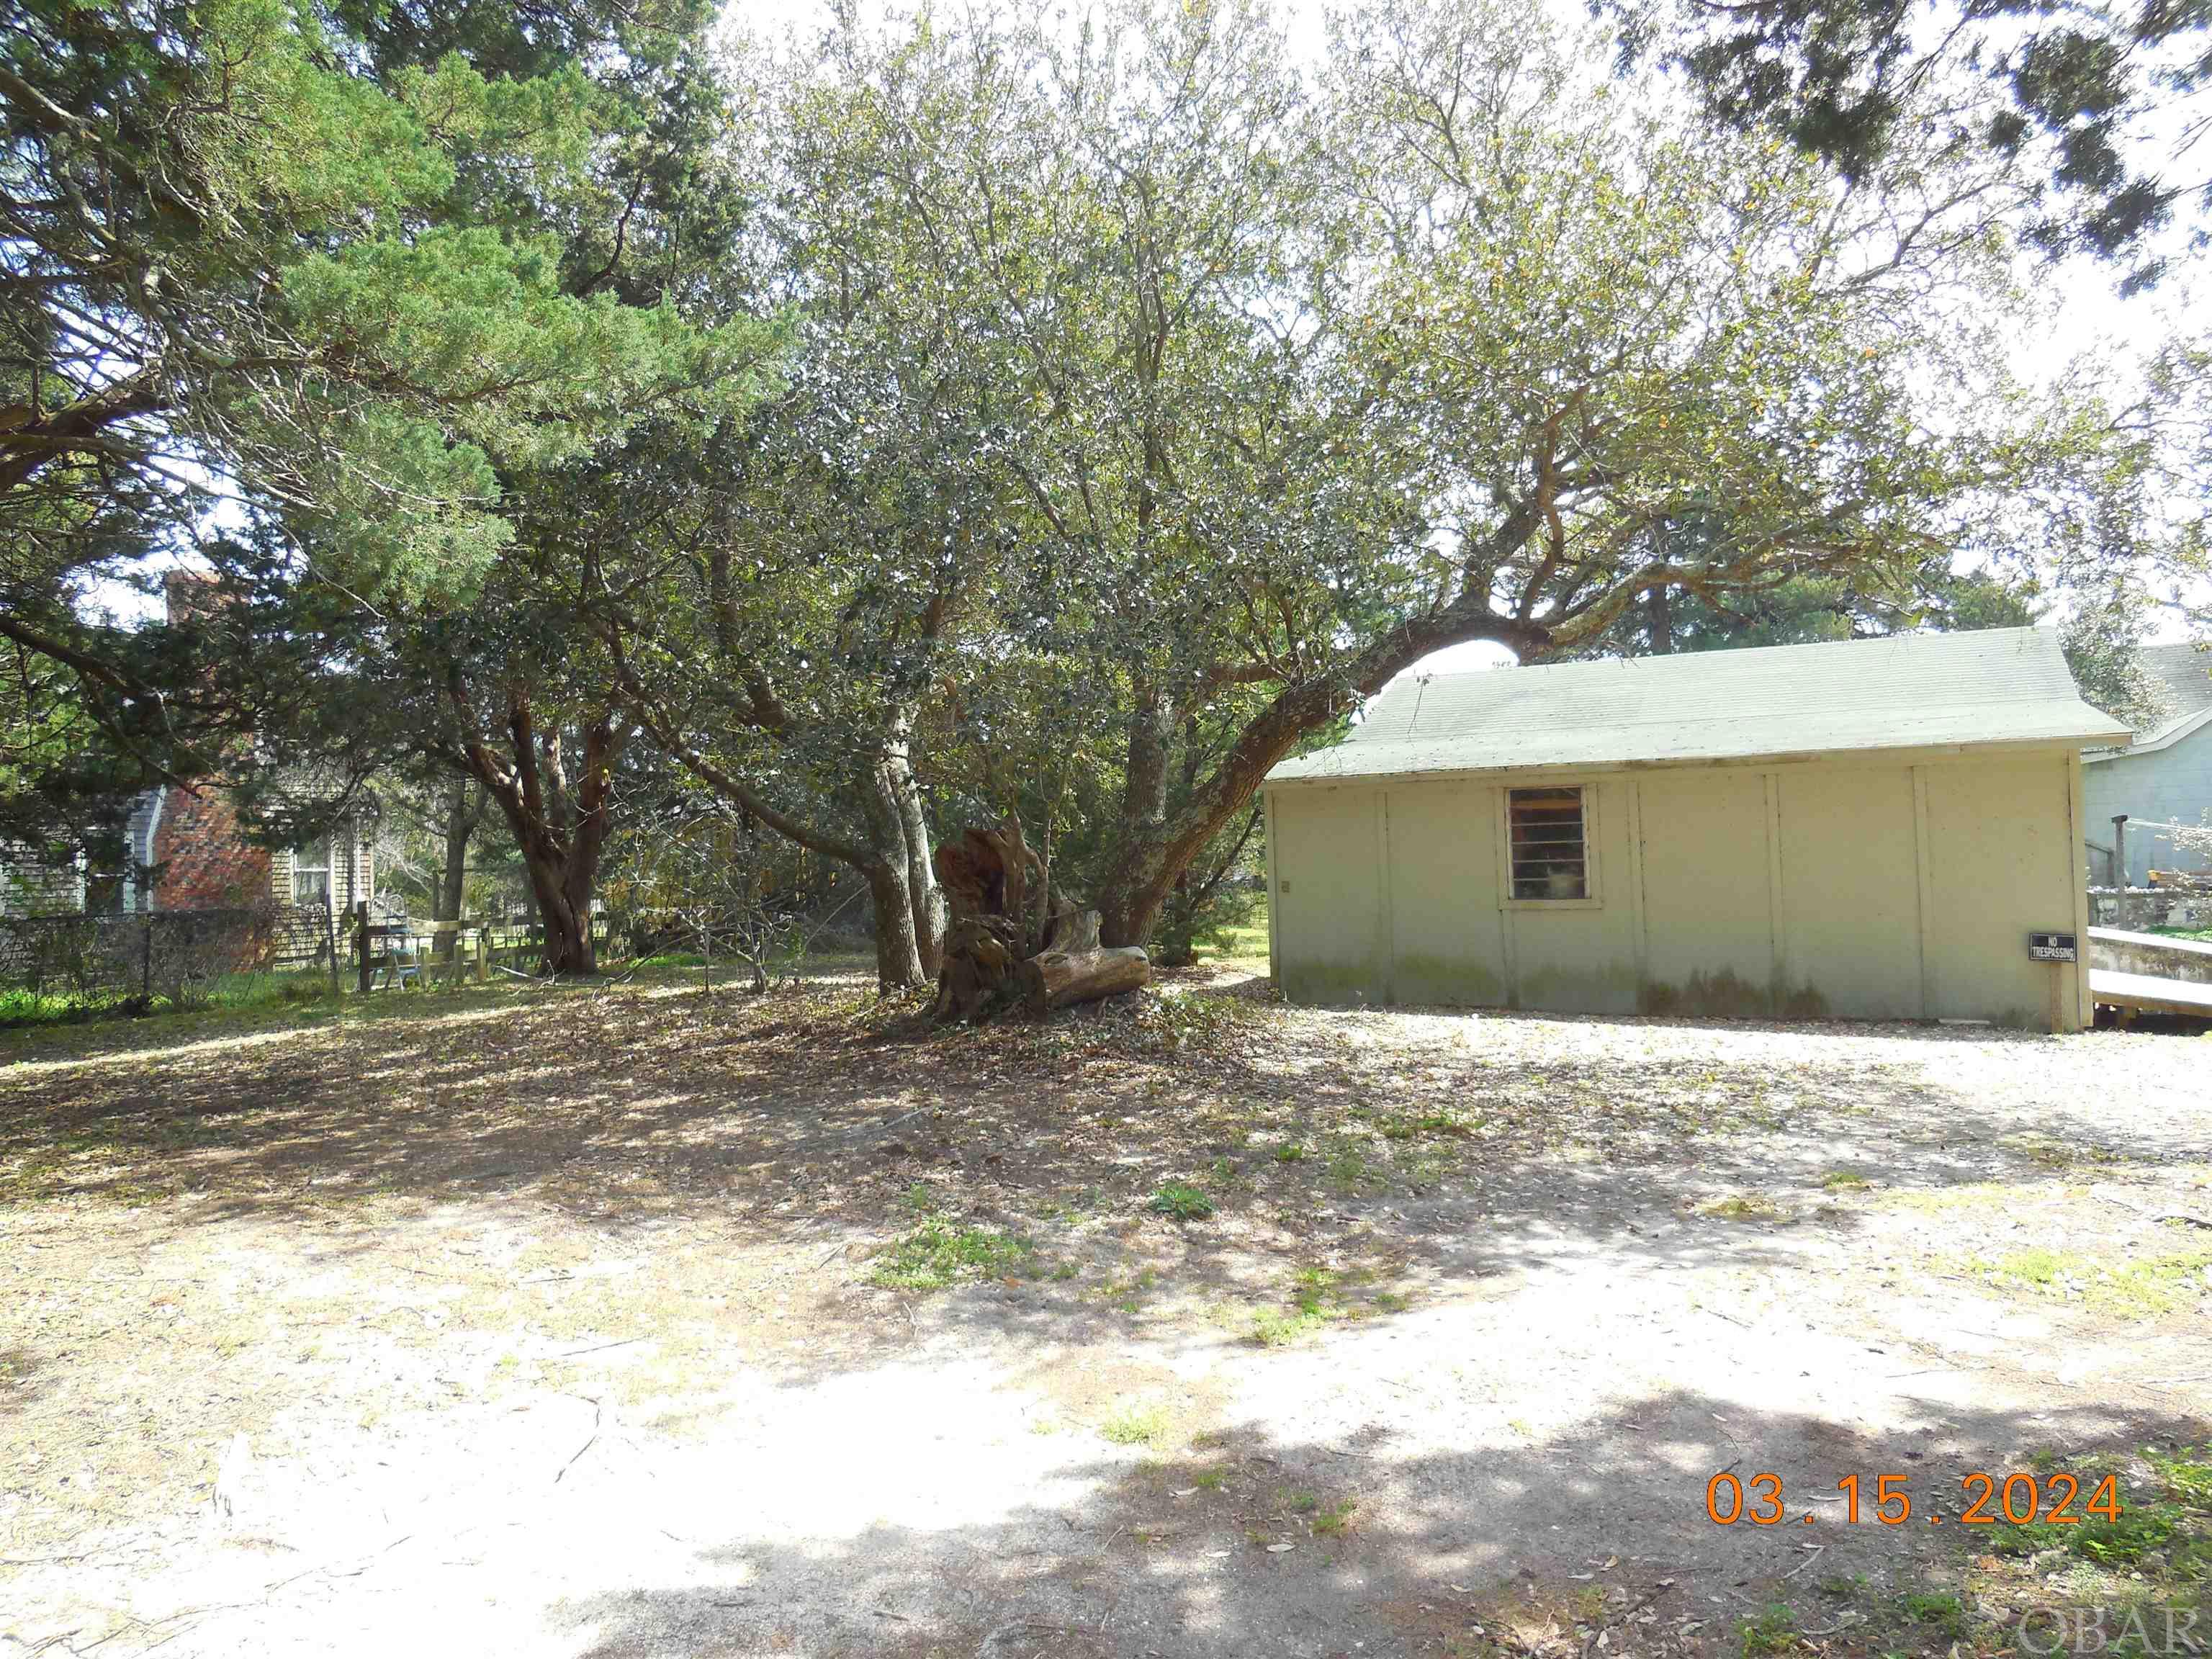 164 Lighthouse Road, Ocracoke, NC 27960, ,Residential,For sale,Lighthouse Road,124998